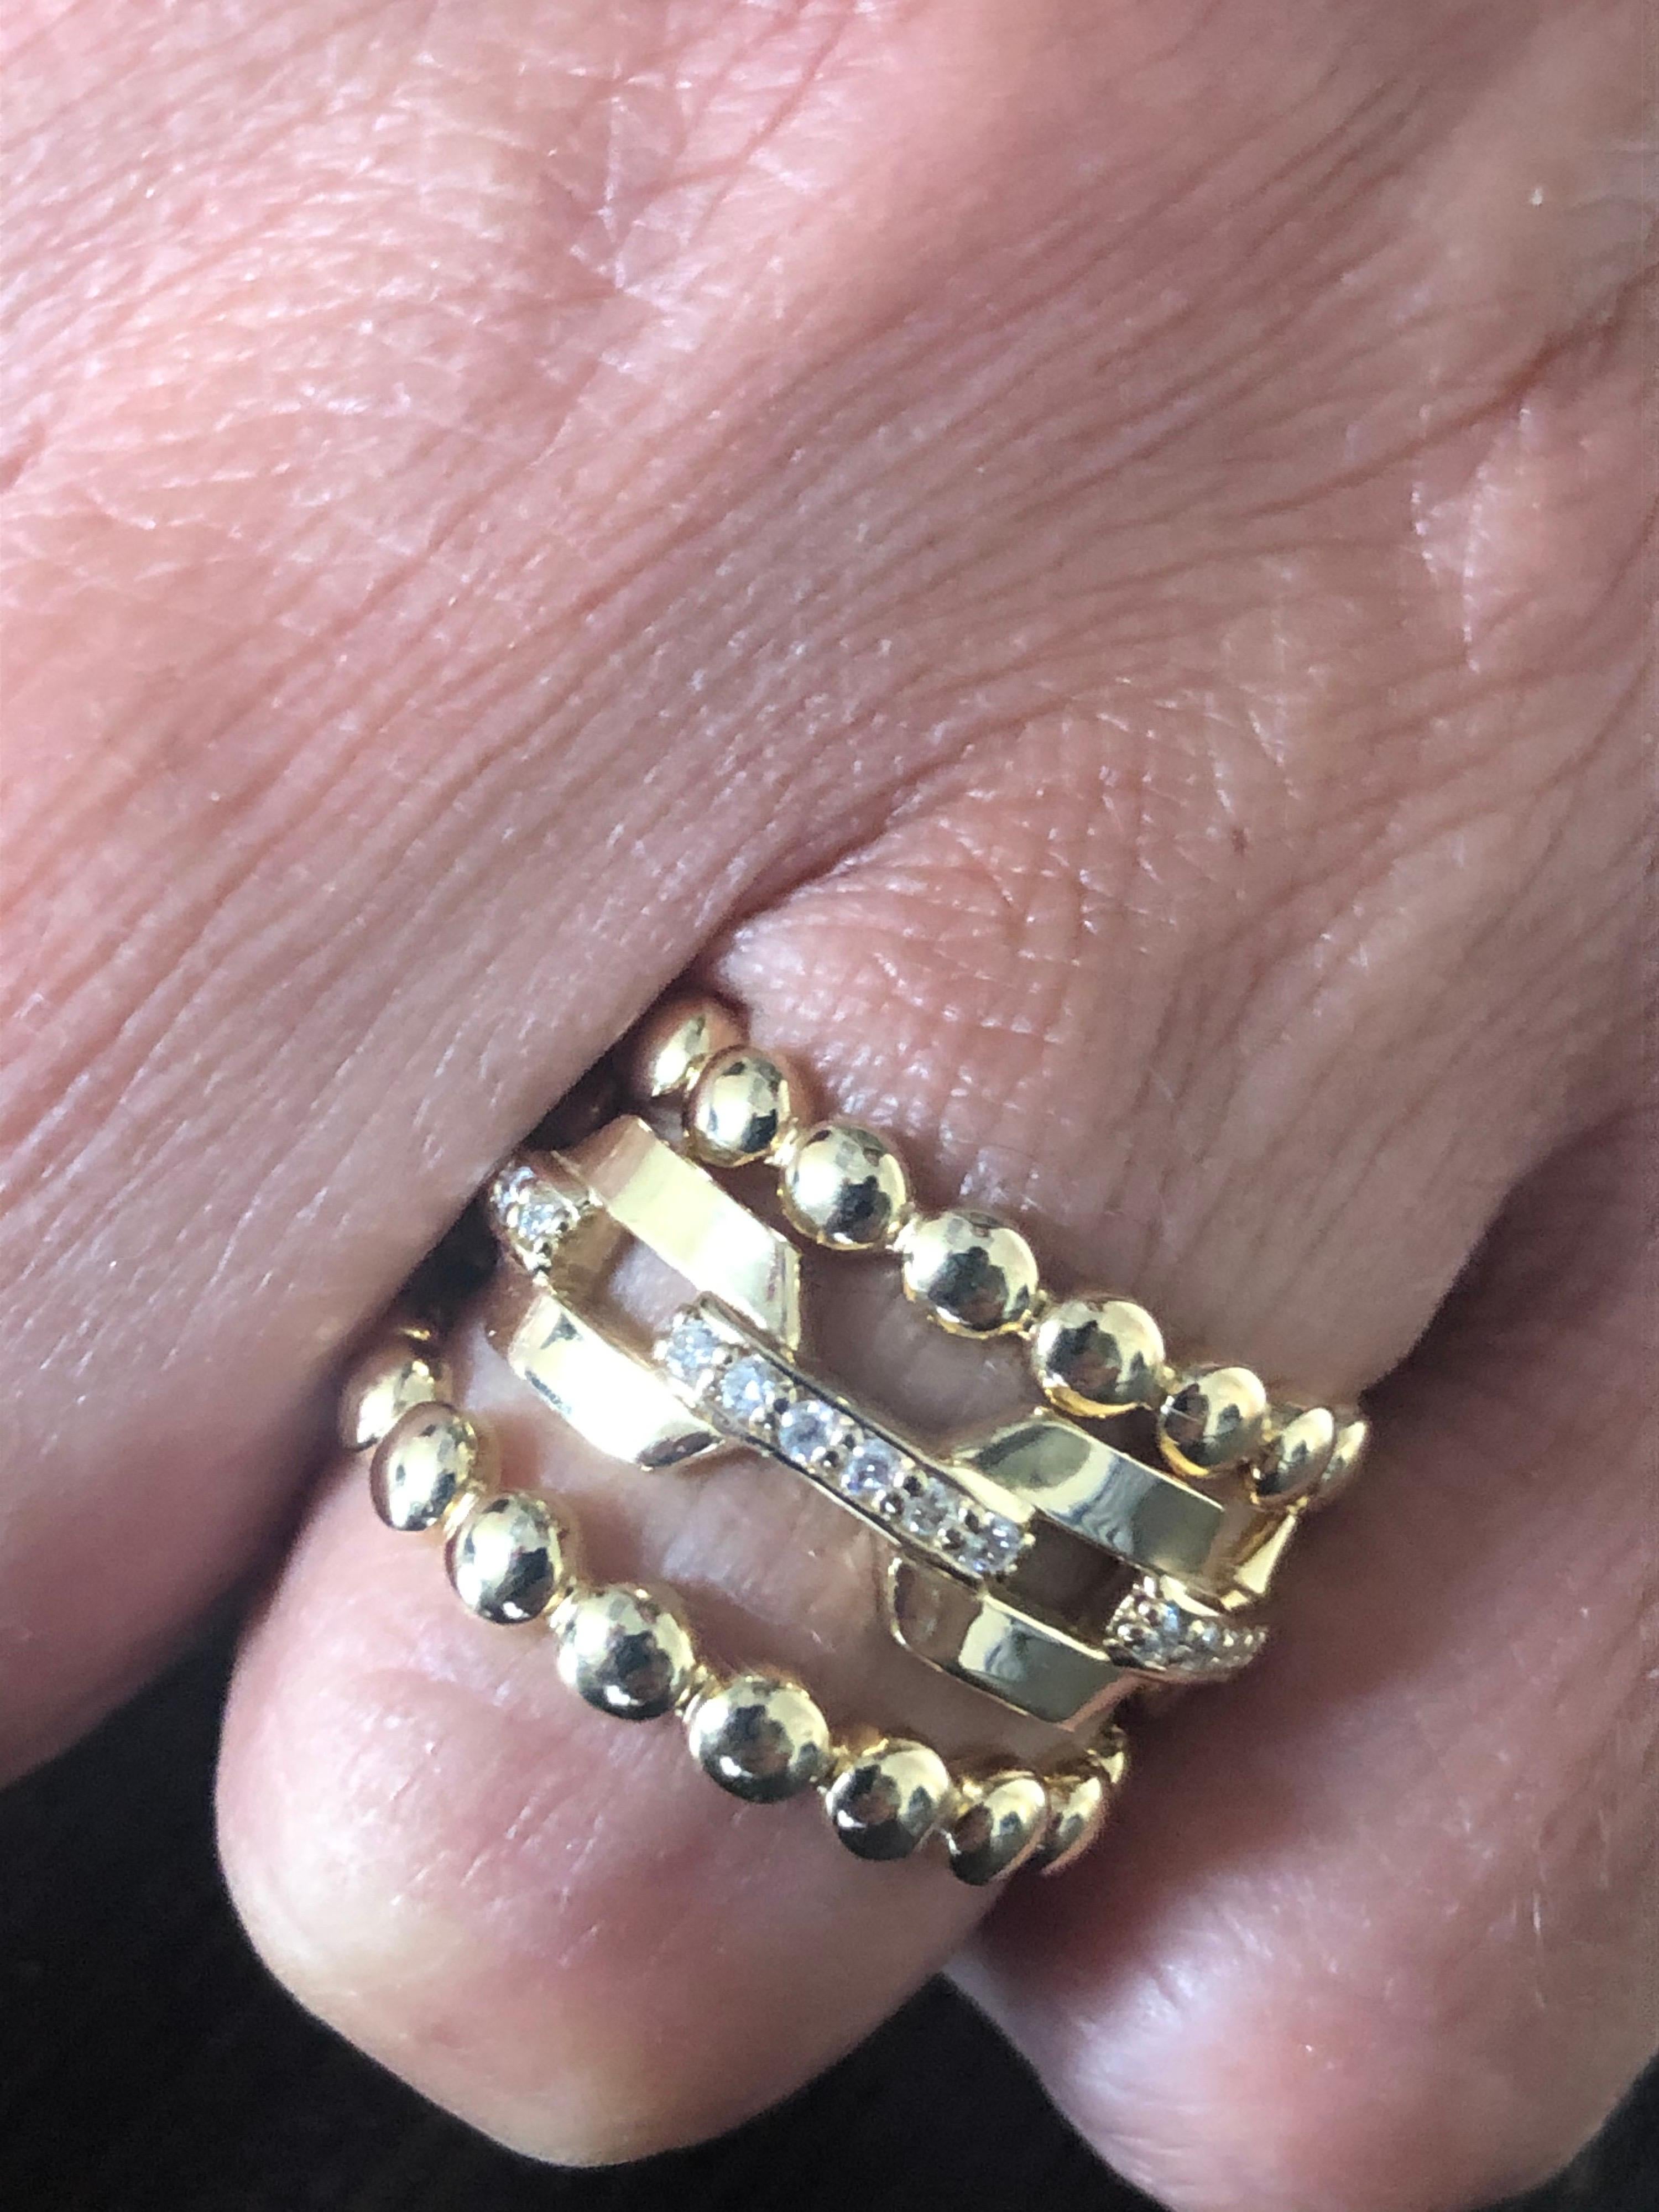 Italian made Yellow gold rings manufactured in 14K. Two yellow beaded rings with a chain link diamond ring. The carat weight is 0.30, the color and clarity is G, SI1-SI2. The rings are sold as a set. The rings are a size 7.